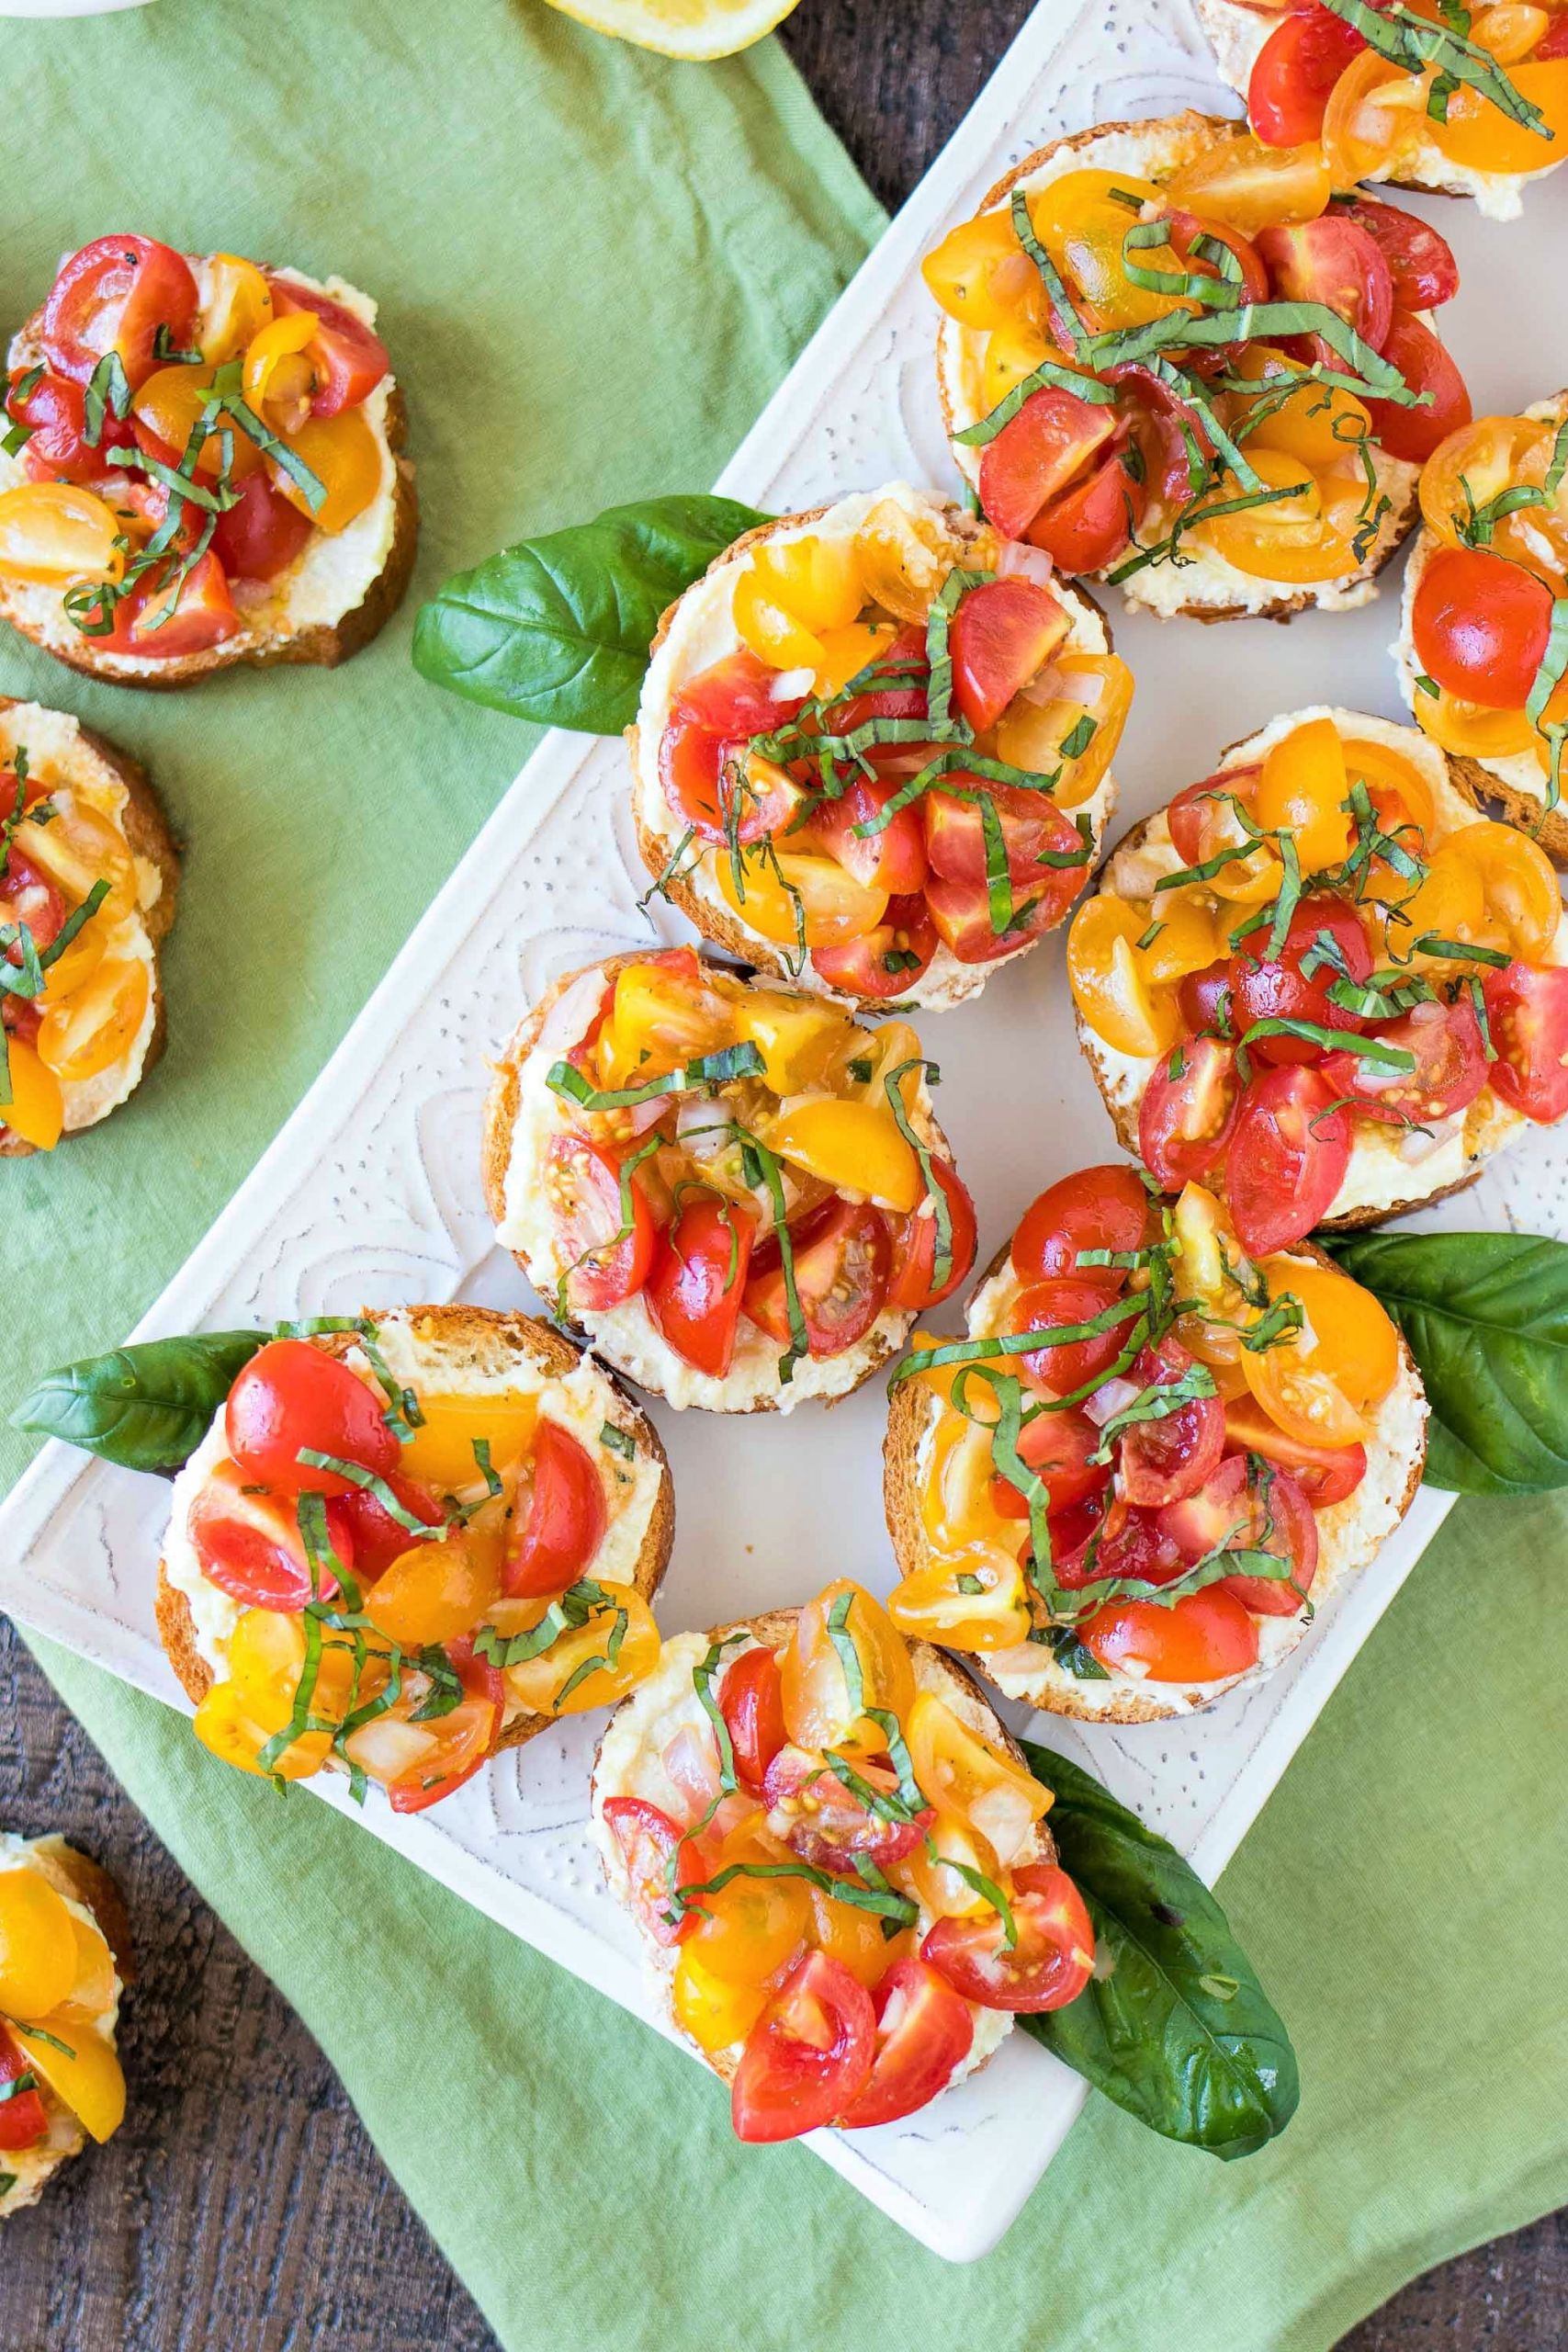 Make Ahead Vegetarian Appetizers
 Tomato & Whipped Feta Crostini CPA Certified Pastry